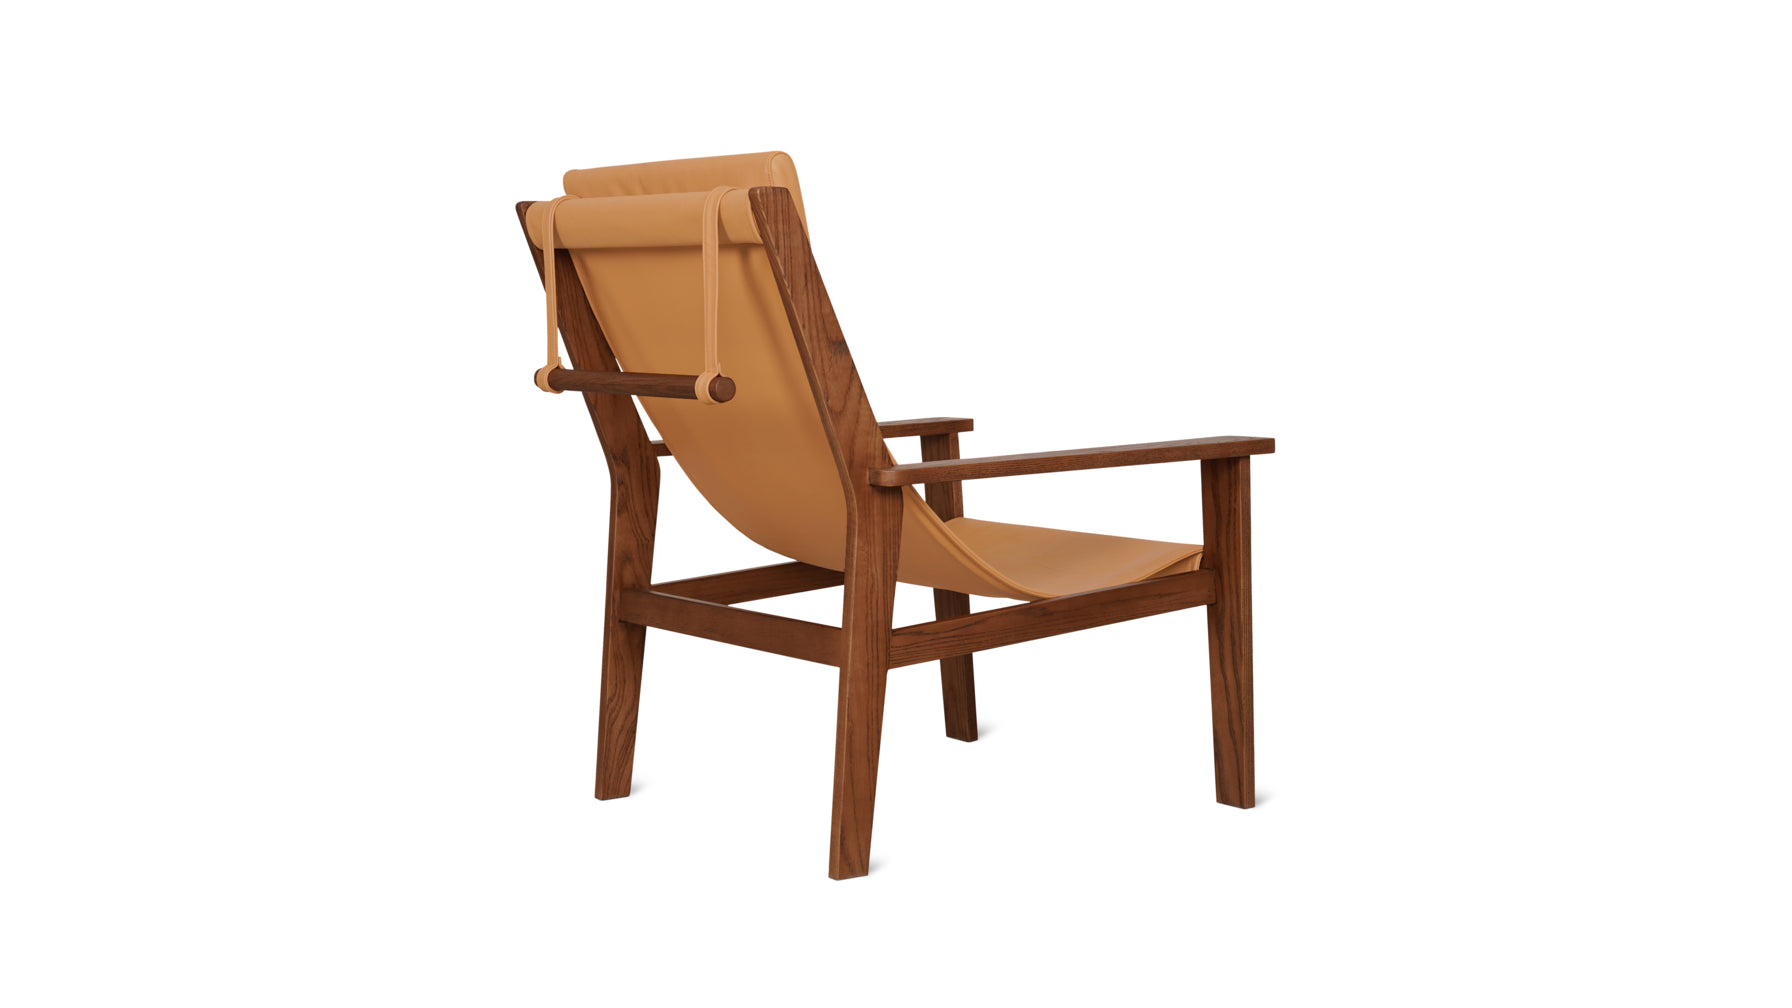 Sweet Life Sling Lounge Chair With Headrest, Terracotta Walnut - Image 4